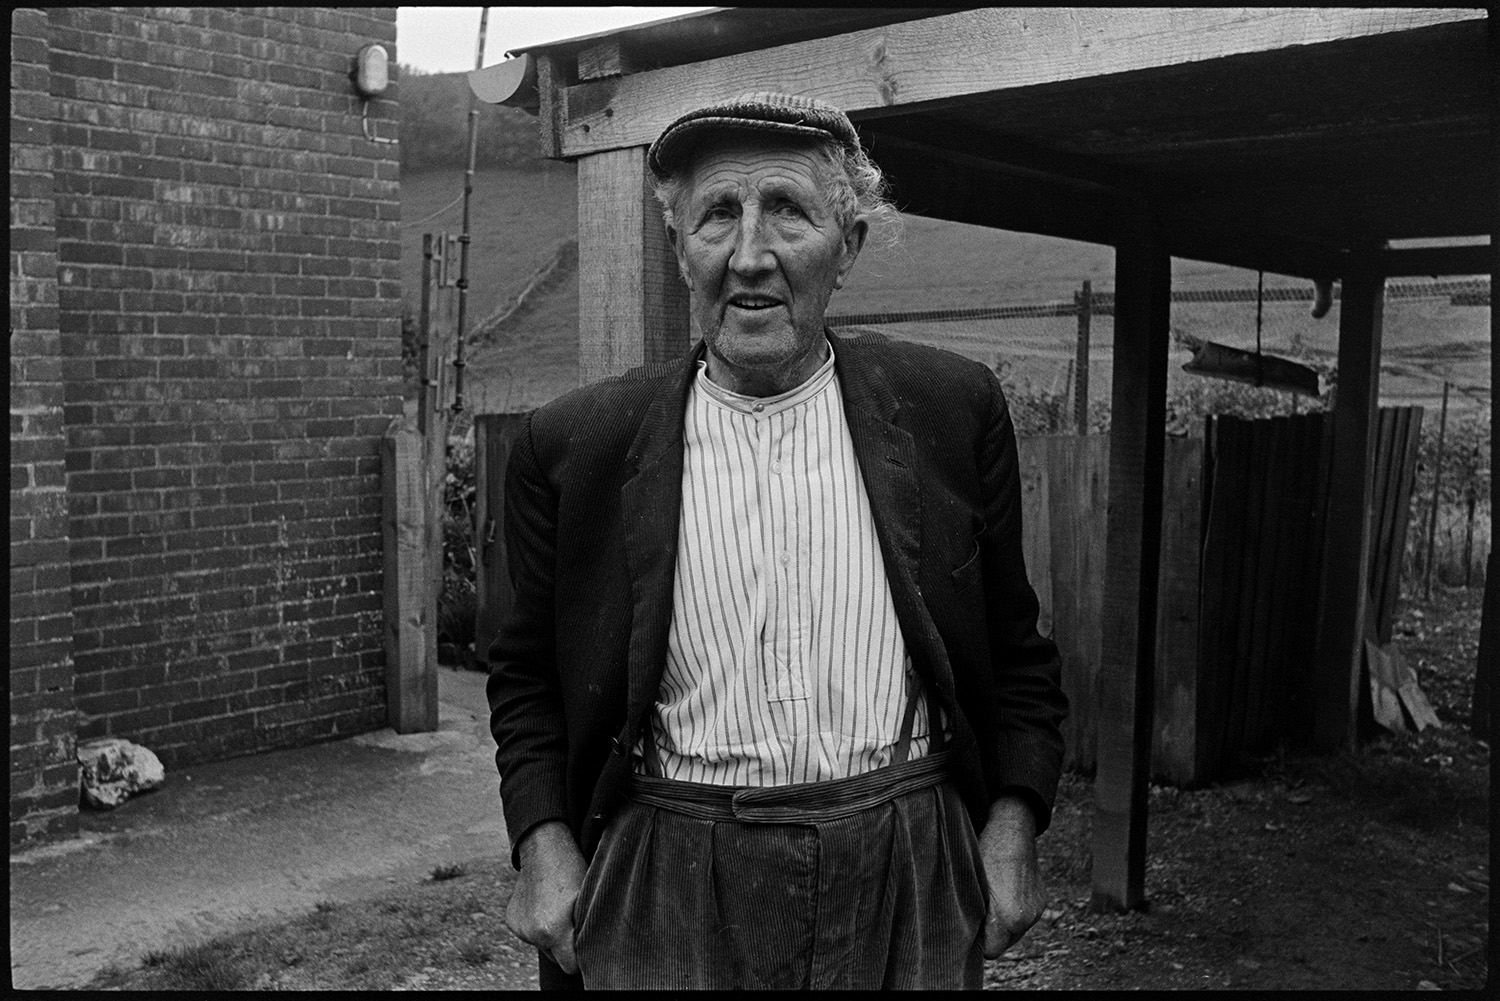 Doctor on rounds talking to man patient outside his house looking at his vegetable patch. 
[Edward Cotsford stood outside his house talking to Doctor Richard Westcott (not pictured in the image). He is stood by a wooden open barn and his vegetable garden is partially visible in the background.]